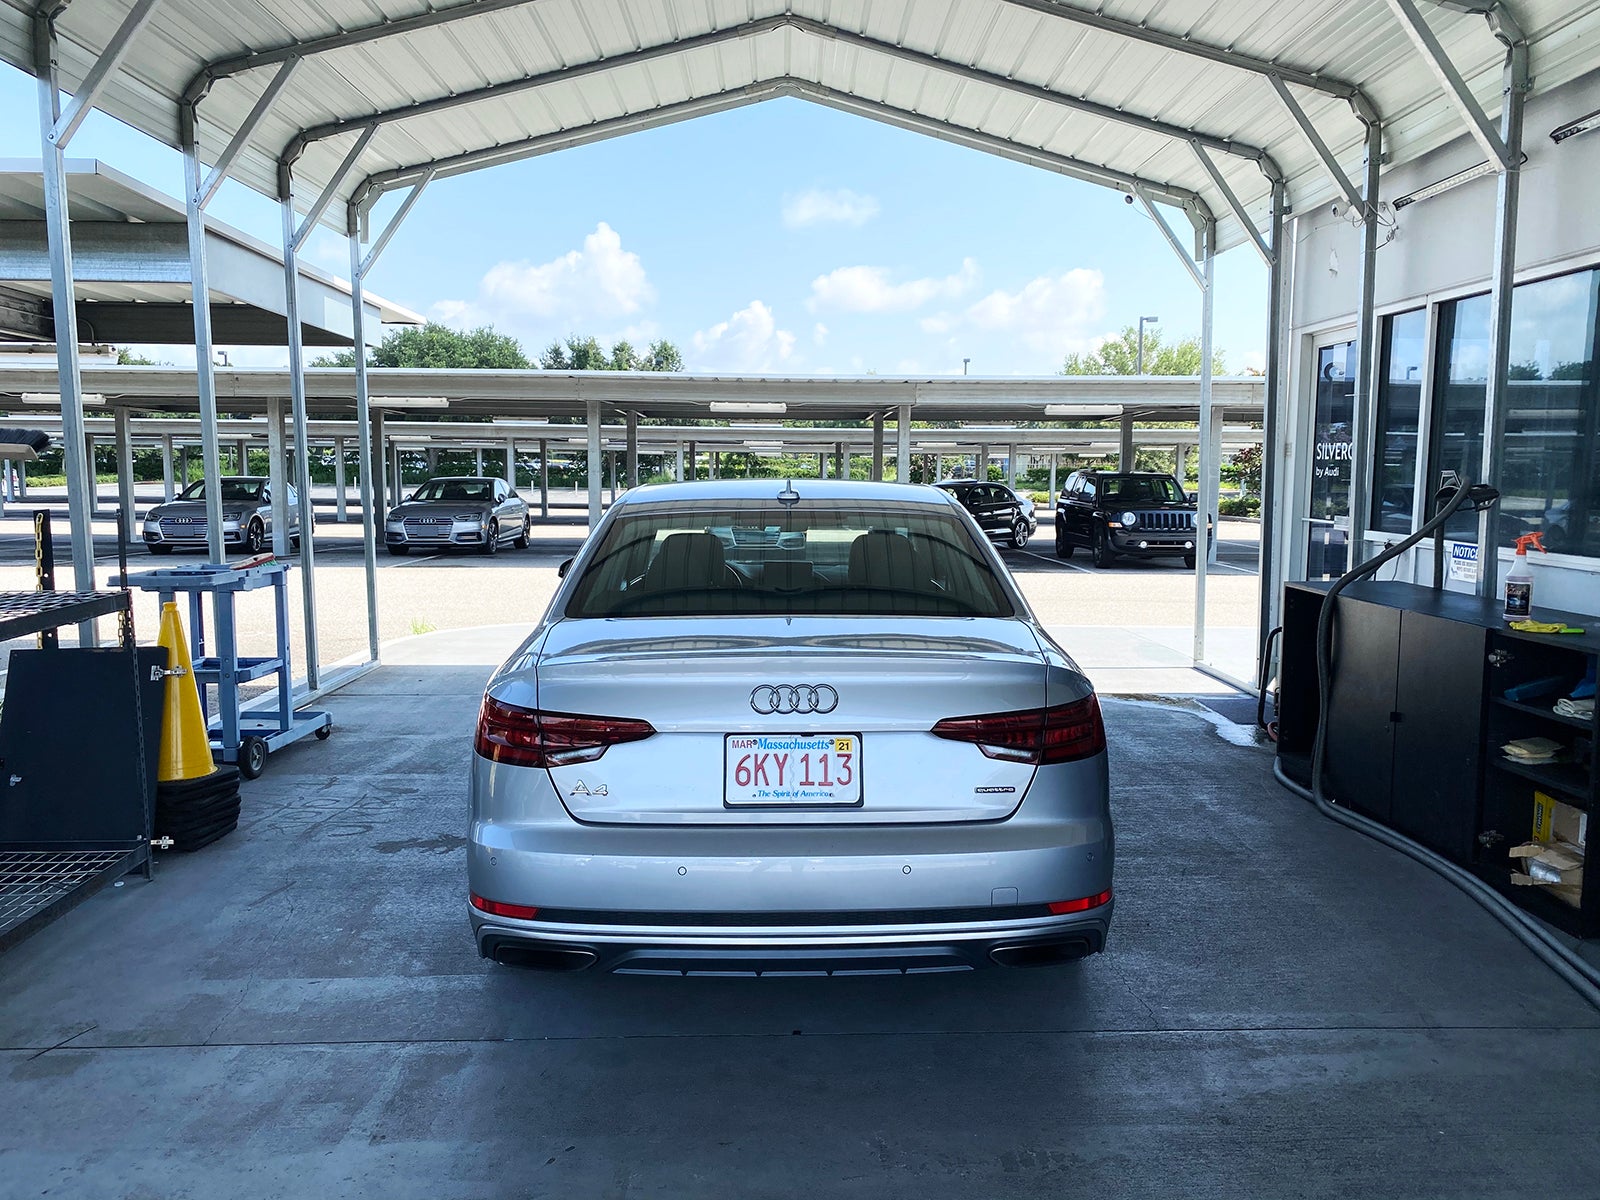 4 lessons from my touchless car rental experience